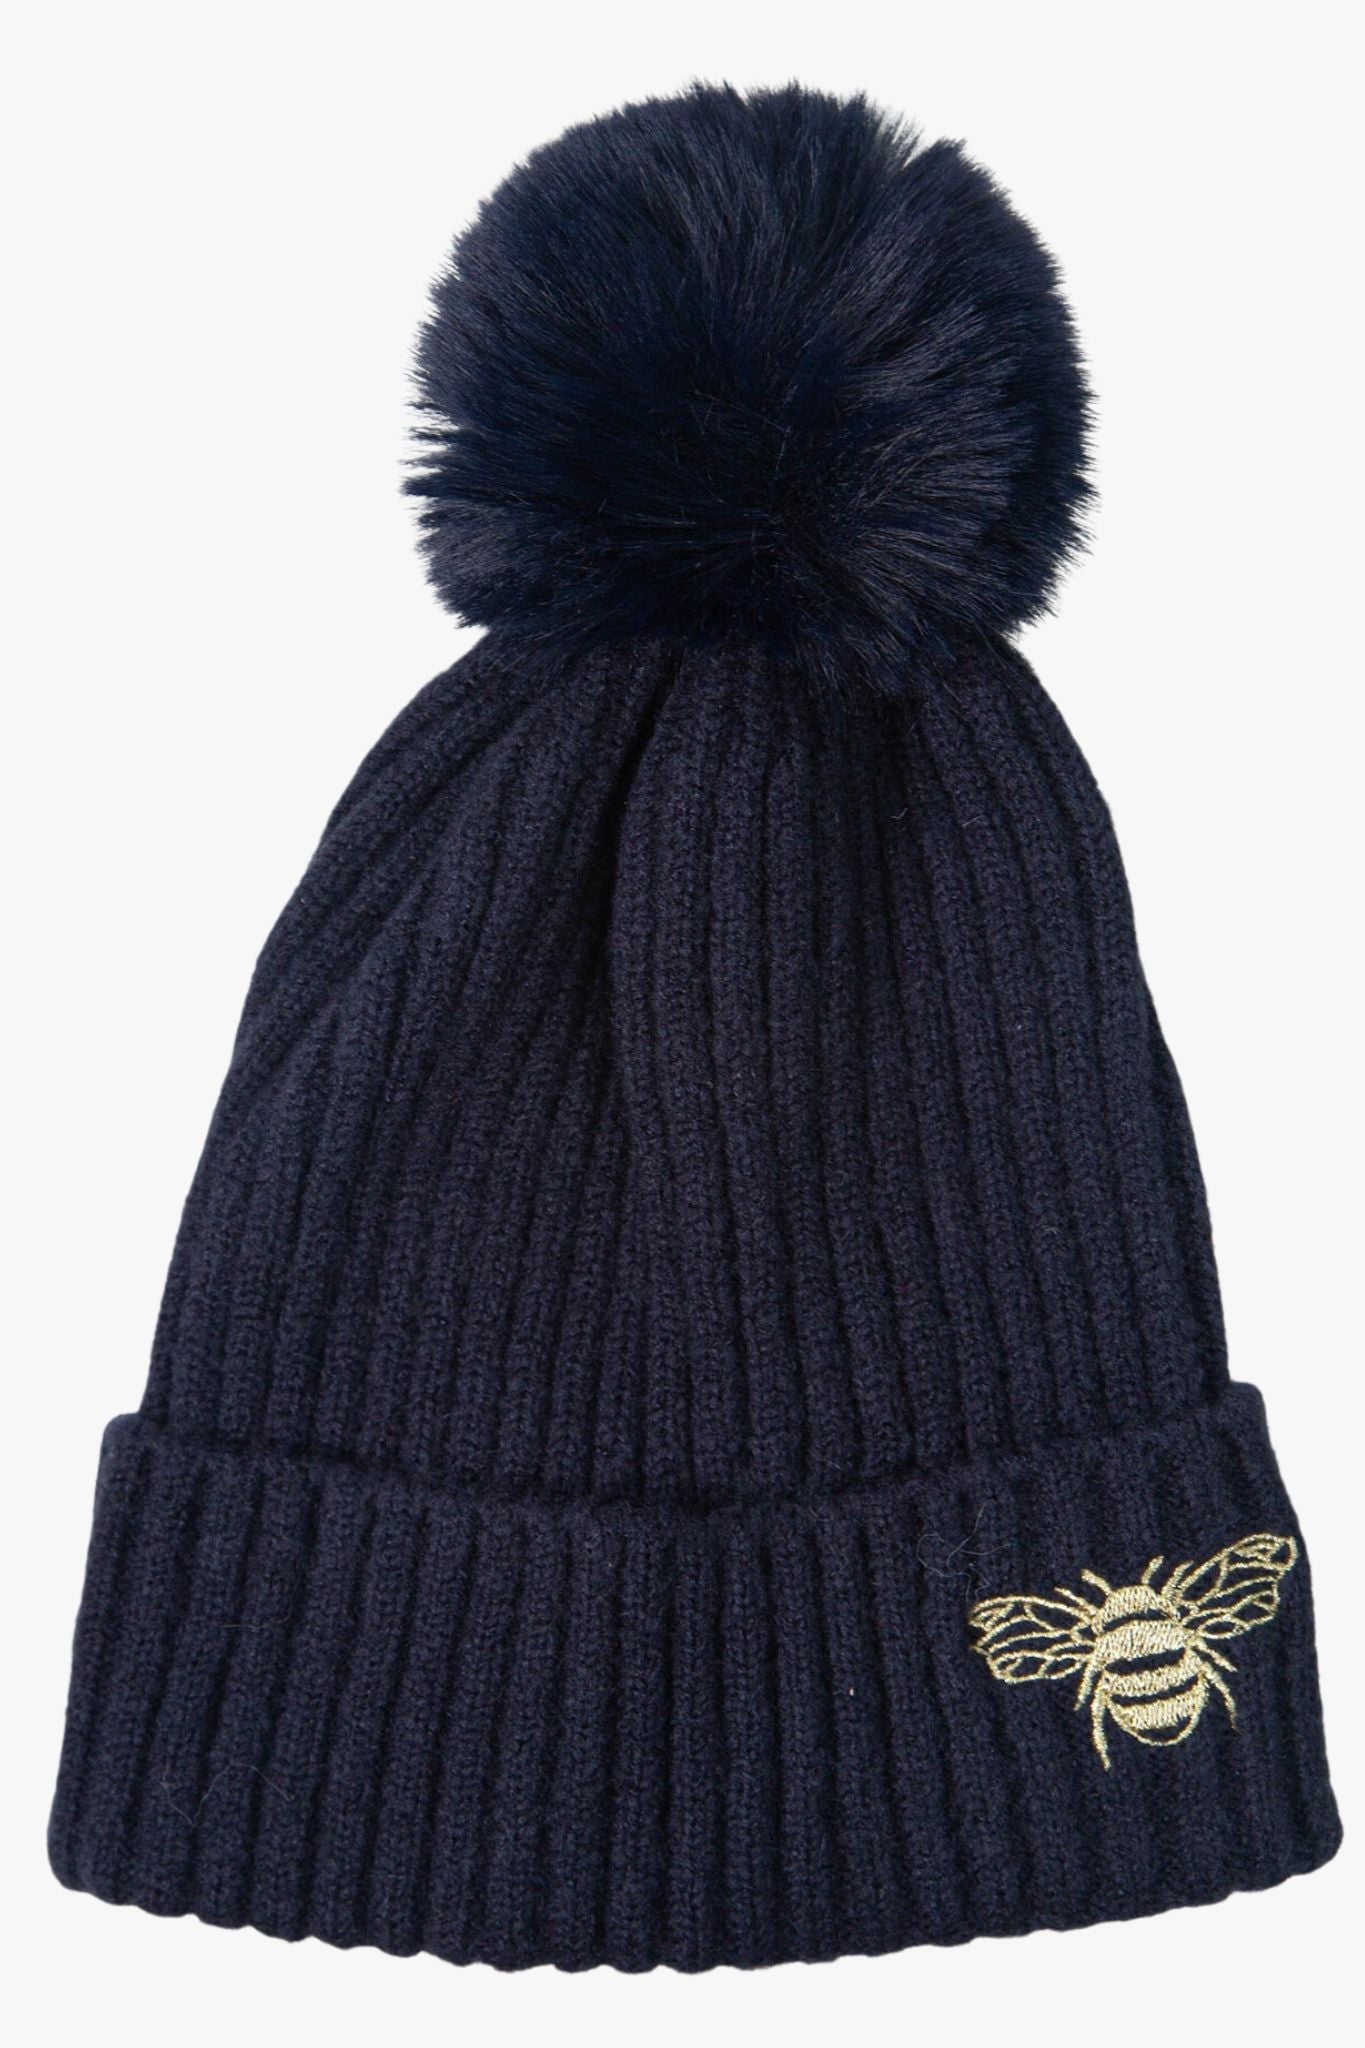 navy blue winter pom pom hat with an embroidered gold bee on the front